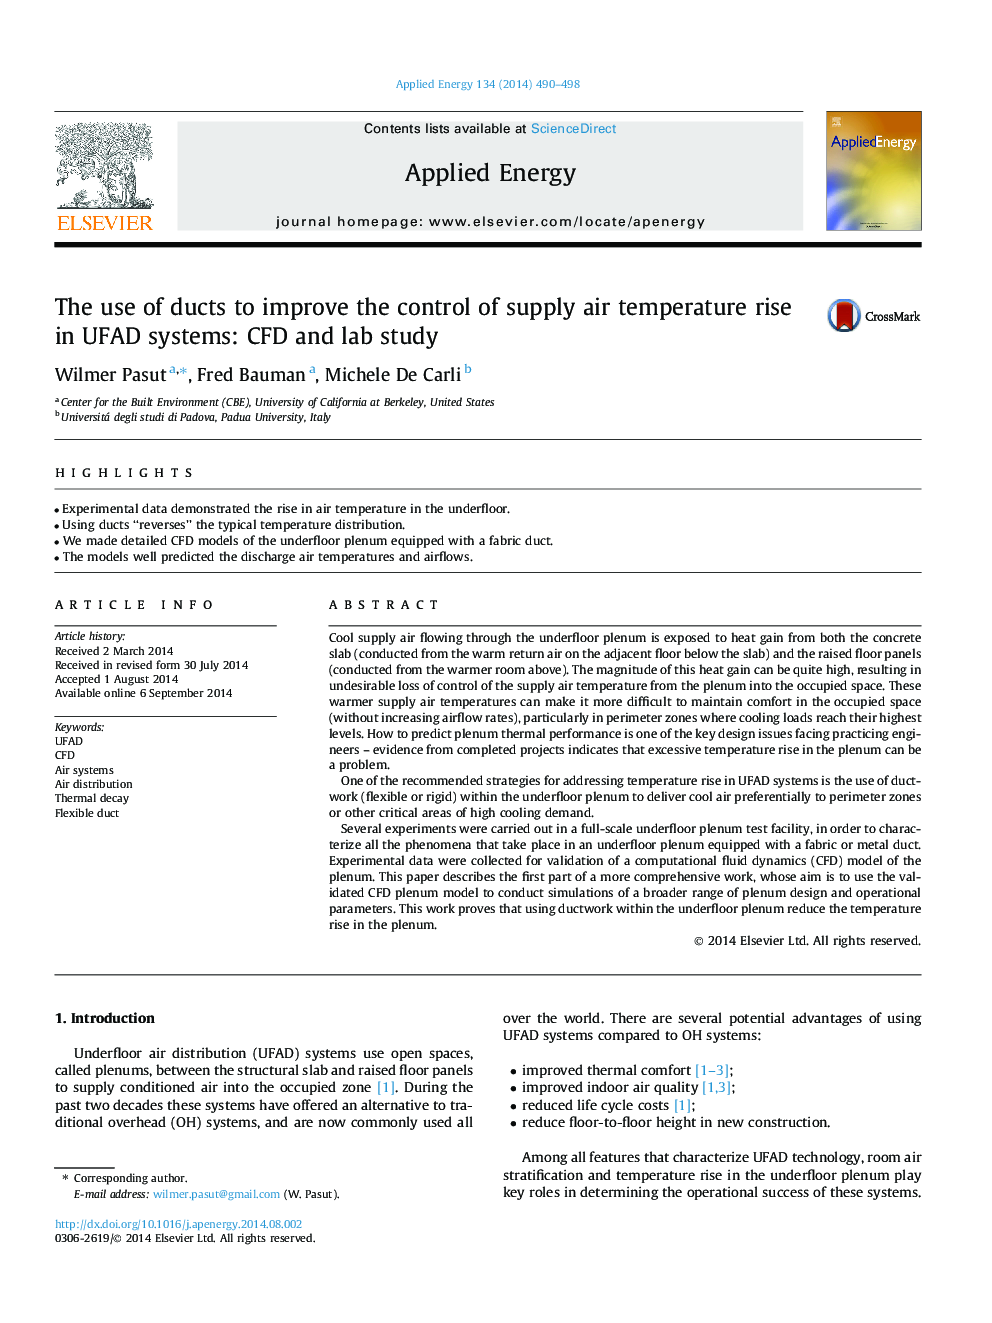 The use of ducts to improve the control of supply air temperature rise in UFAD systems: CFD and lab study